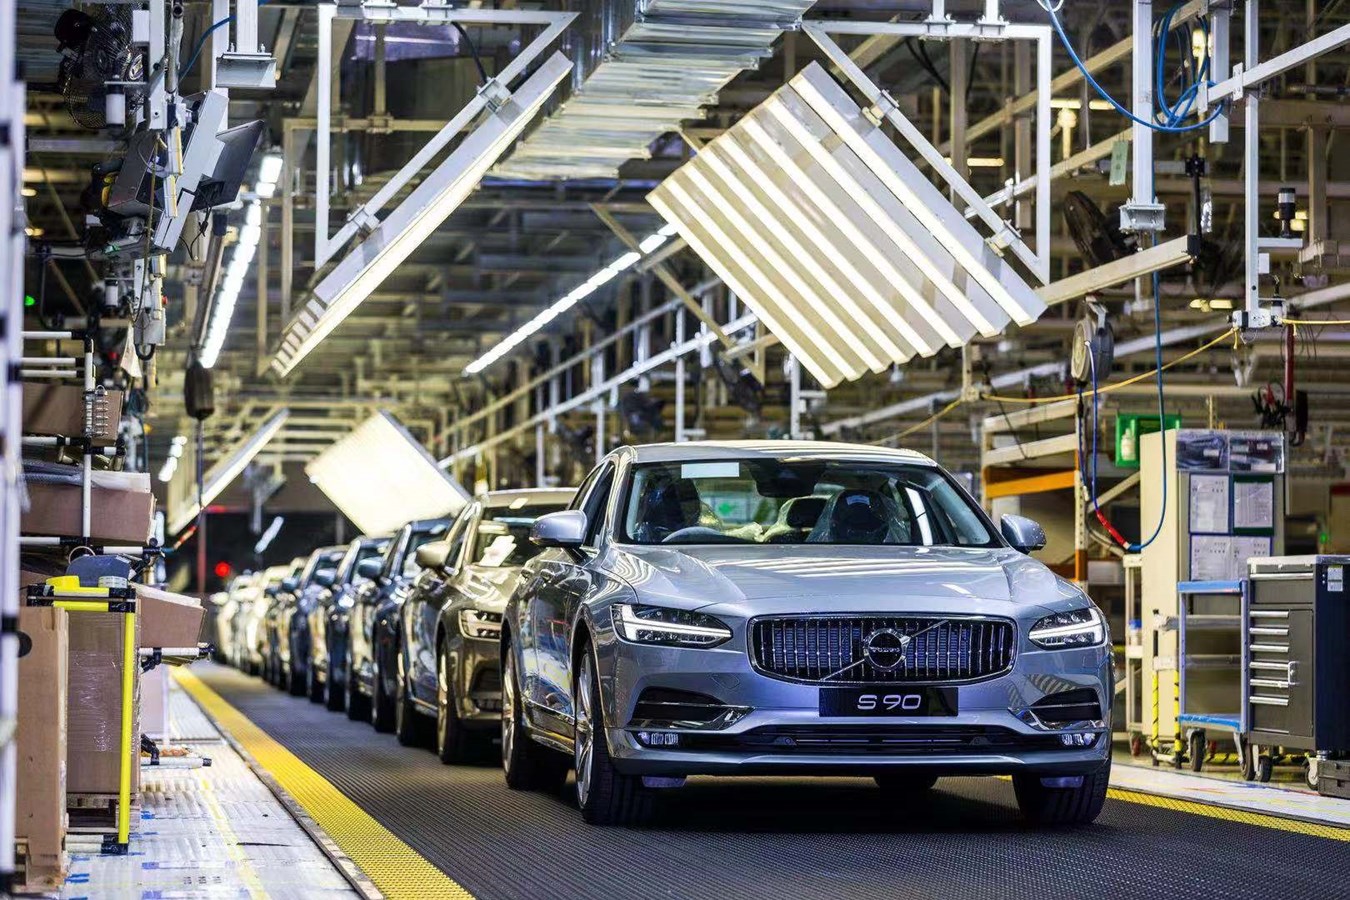 The 100,000th S90 rolls of production line in Volvo Cars Daqing plant in China